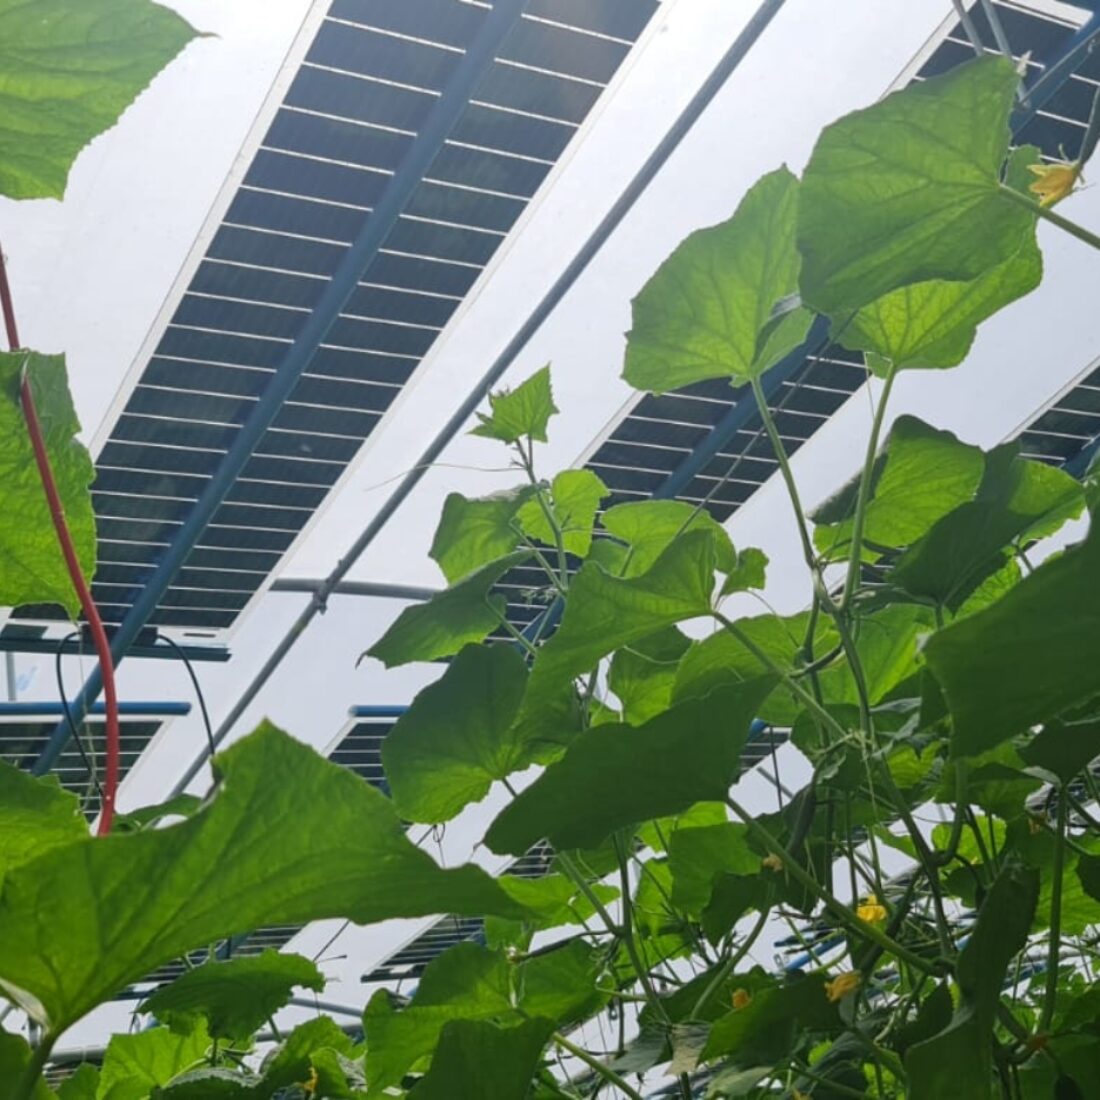 The TriSolar tilting panels absorb light rays from multiple locations, meaning they can tilt accordingly and not block the sunlight the crops beneath them need. Photo courtesy of TriSolar